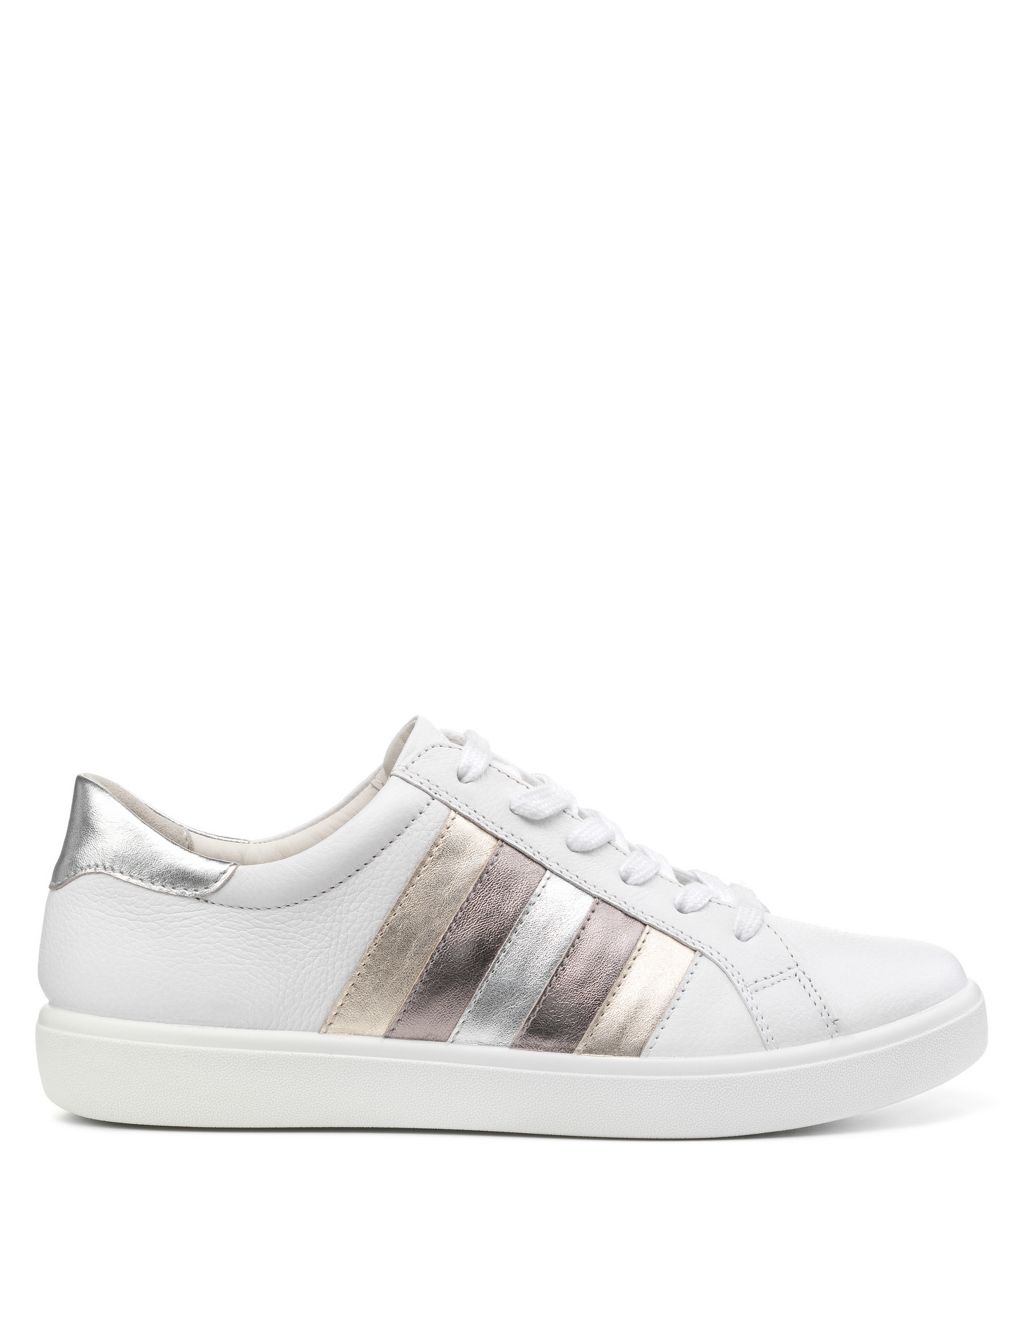 Switch Leather Lace Up Side Detail Trainers | Hotter | M&S